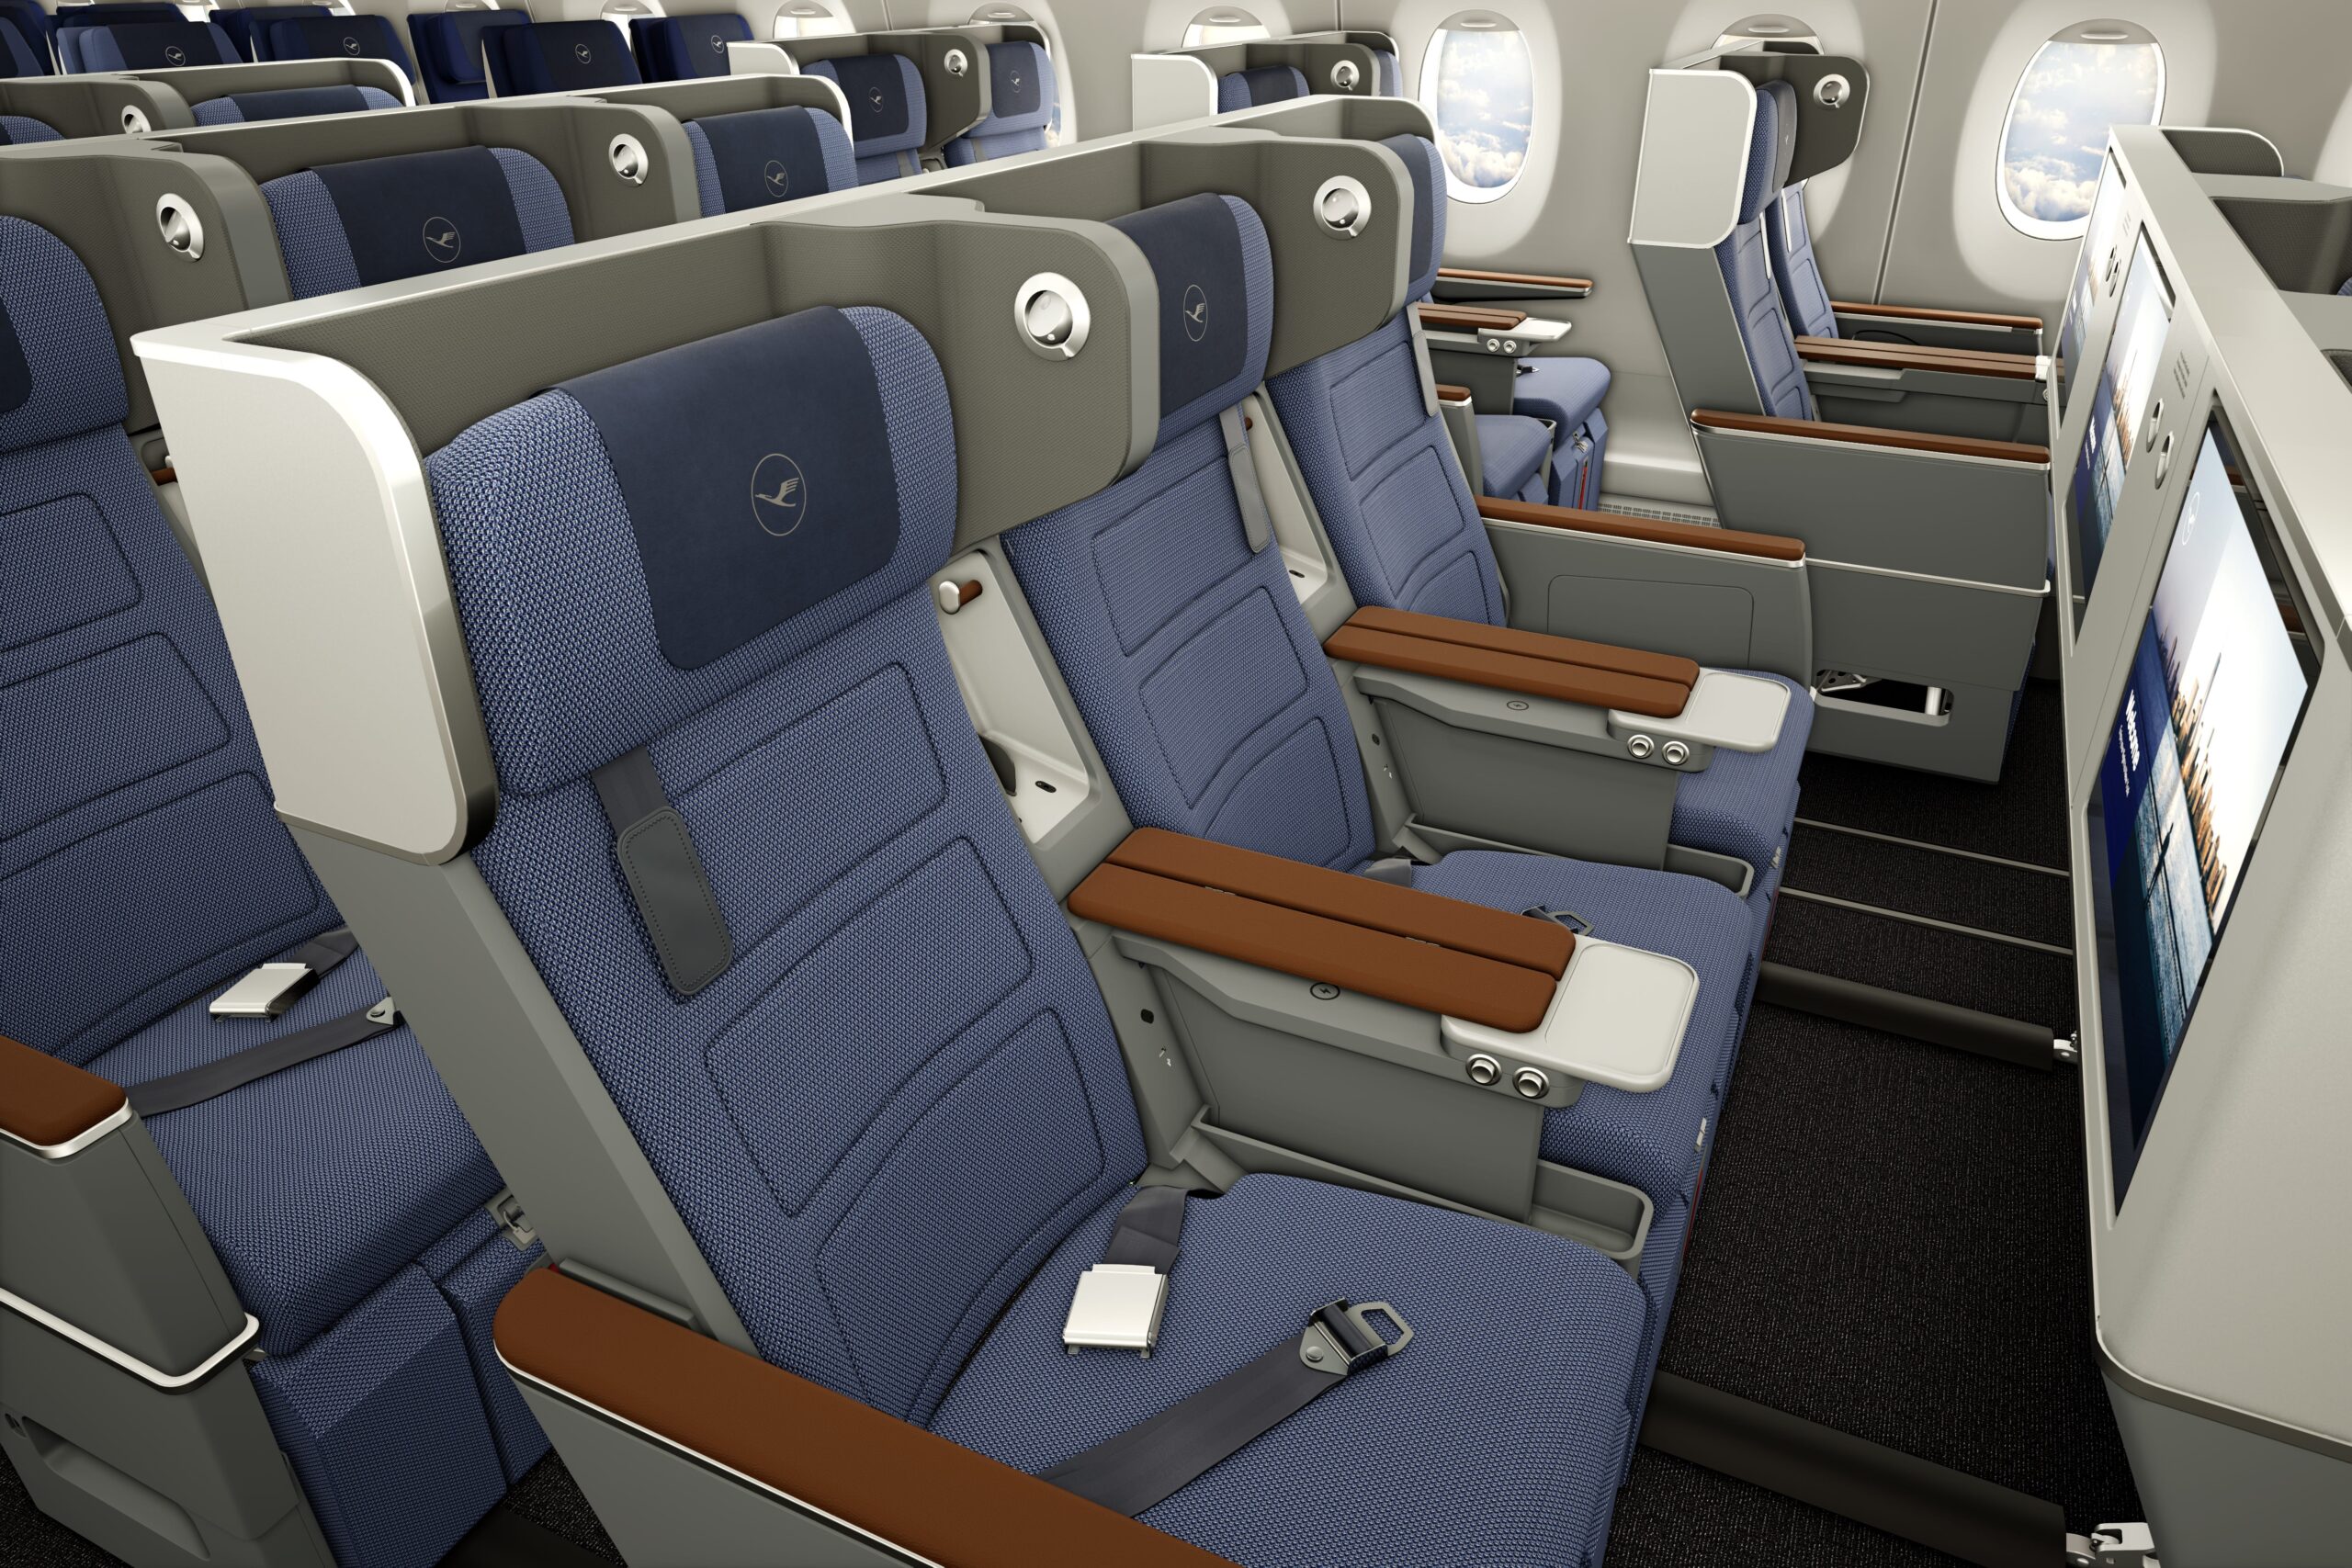 A photo of the premium economy seats in Lufthansa's new Allegris layout planes.